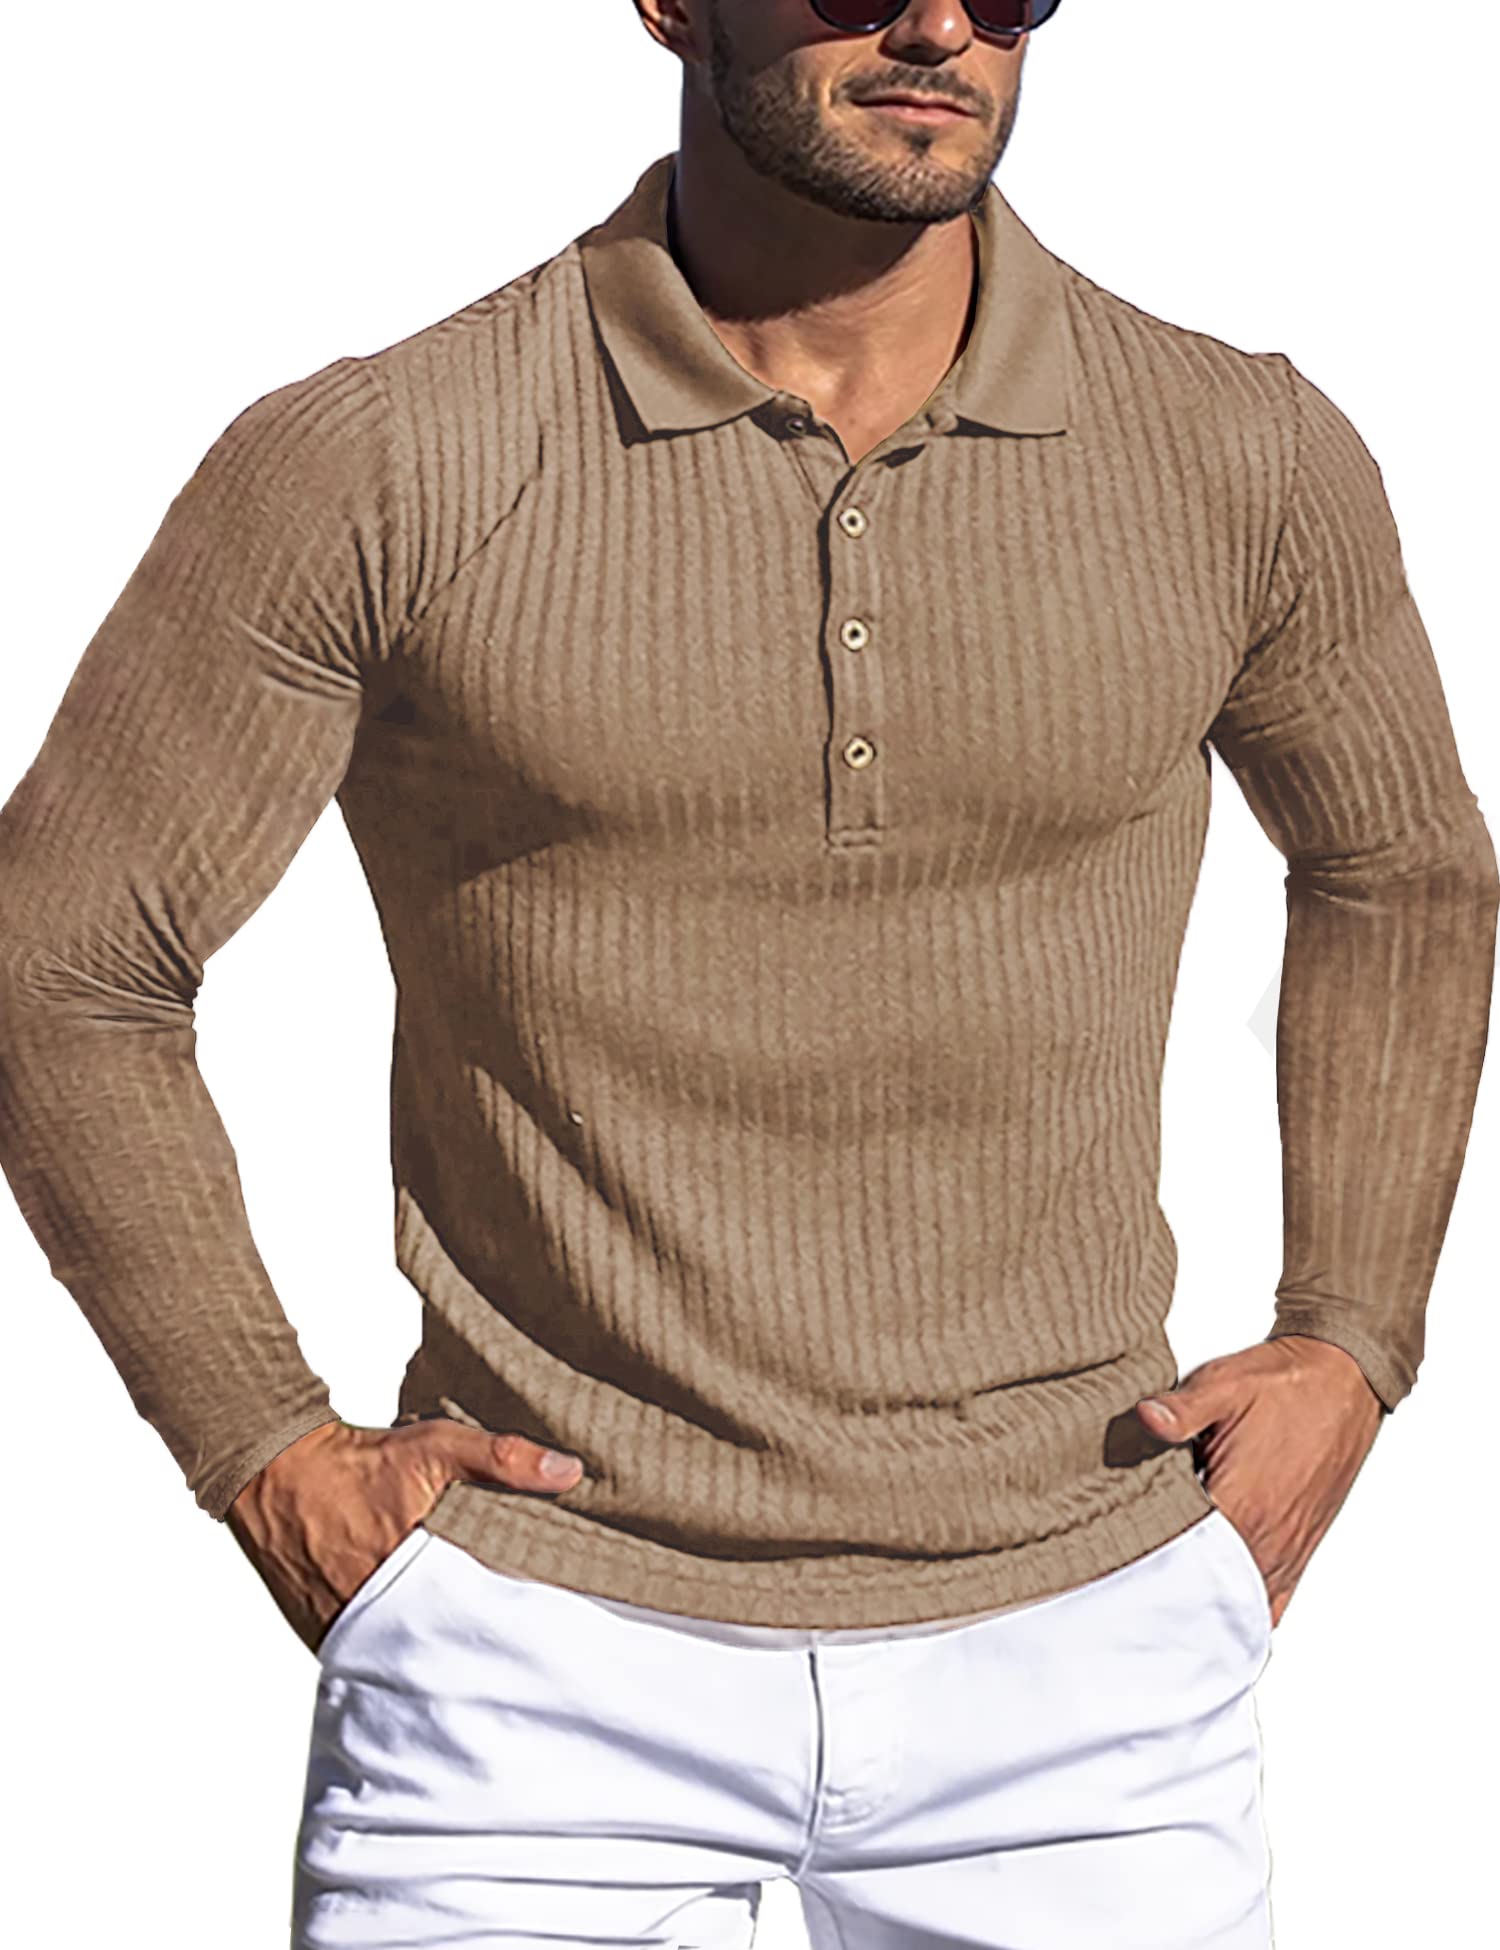 Printrendy Men's Ribbed Texture Solid Color Long Sleeve T-shirt Basic Casual Muscle Soft